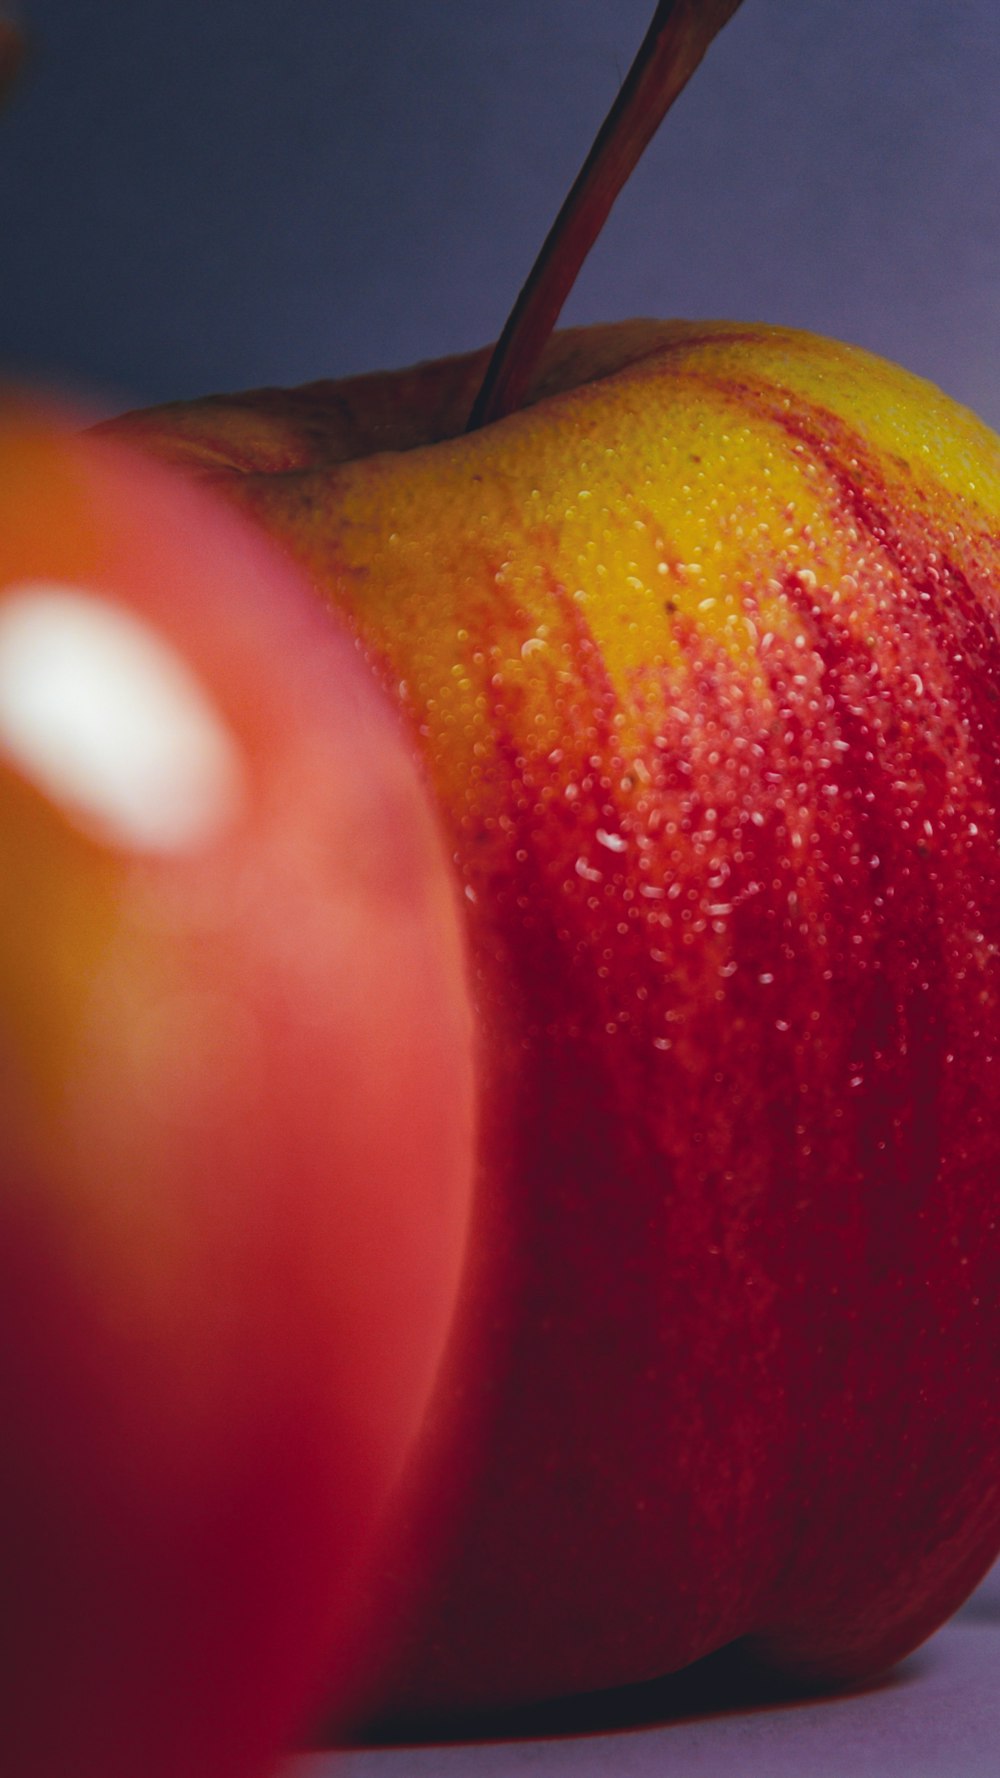 a close-up of a red apple